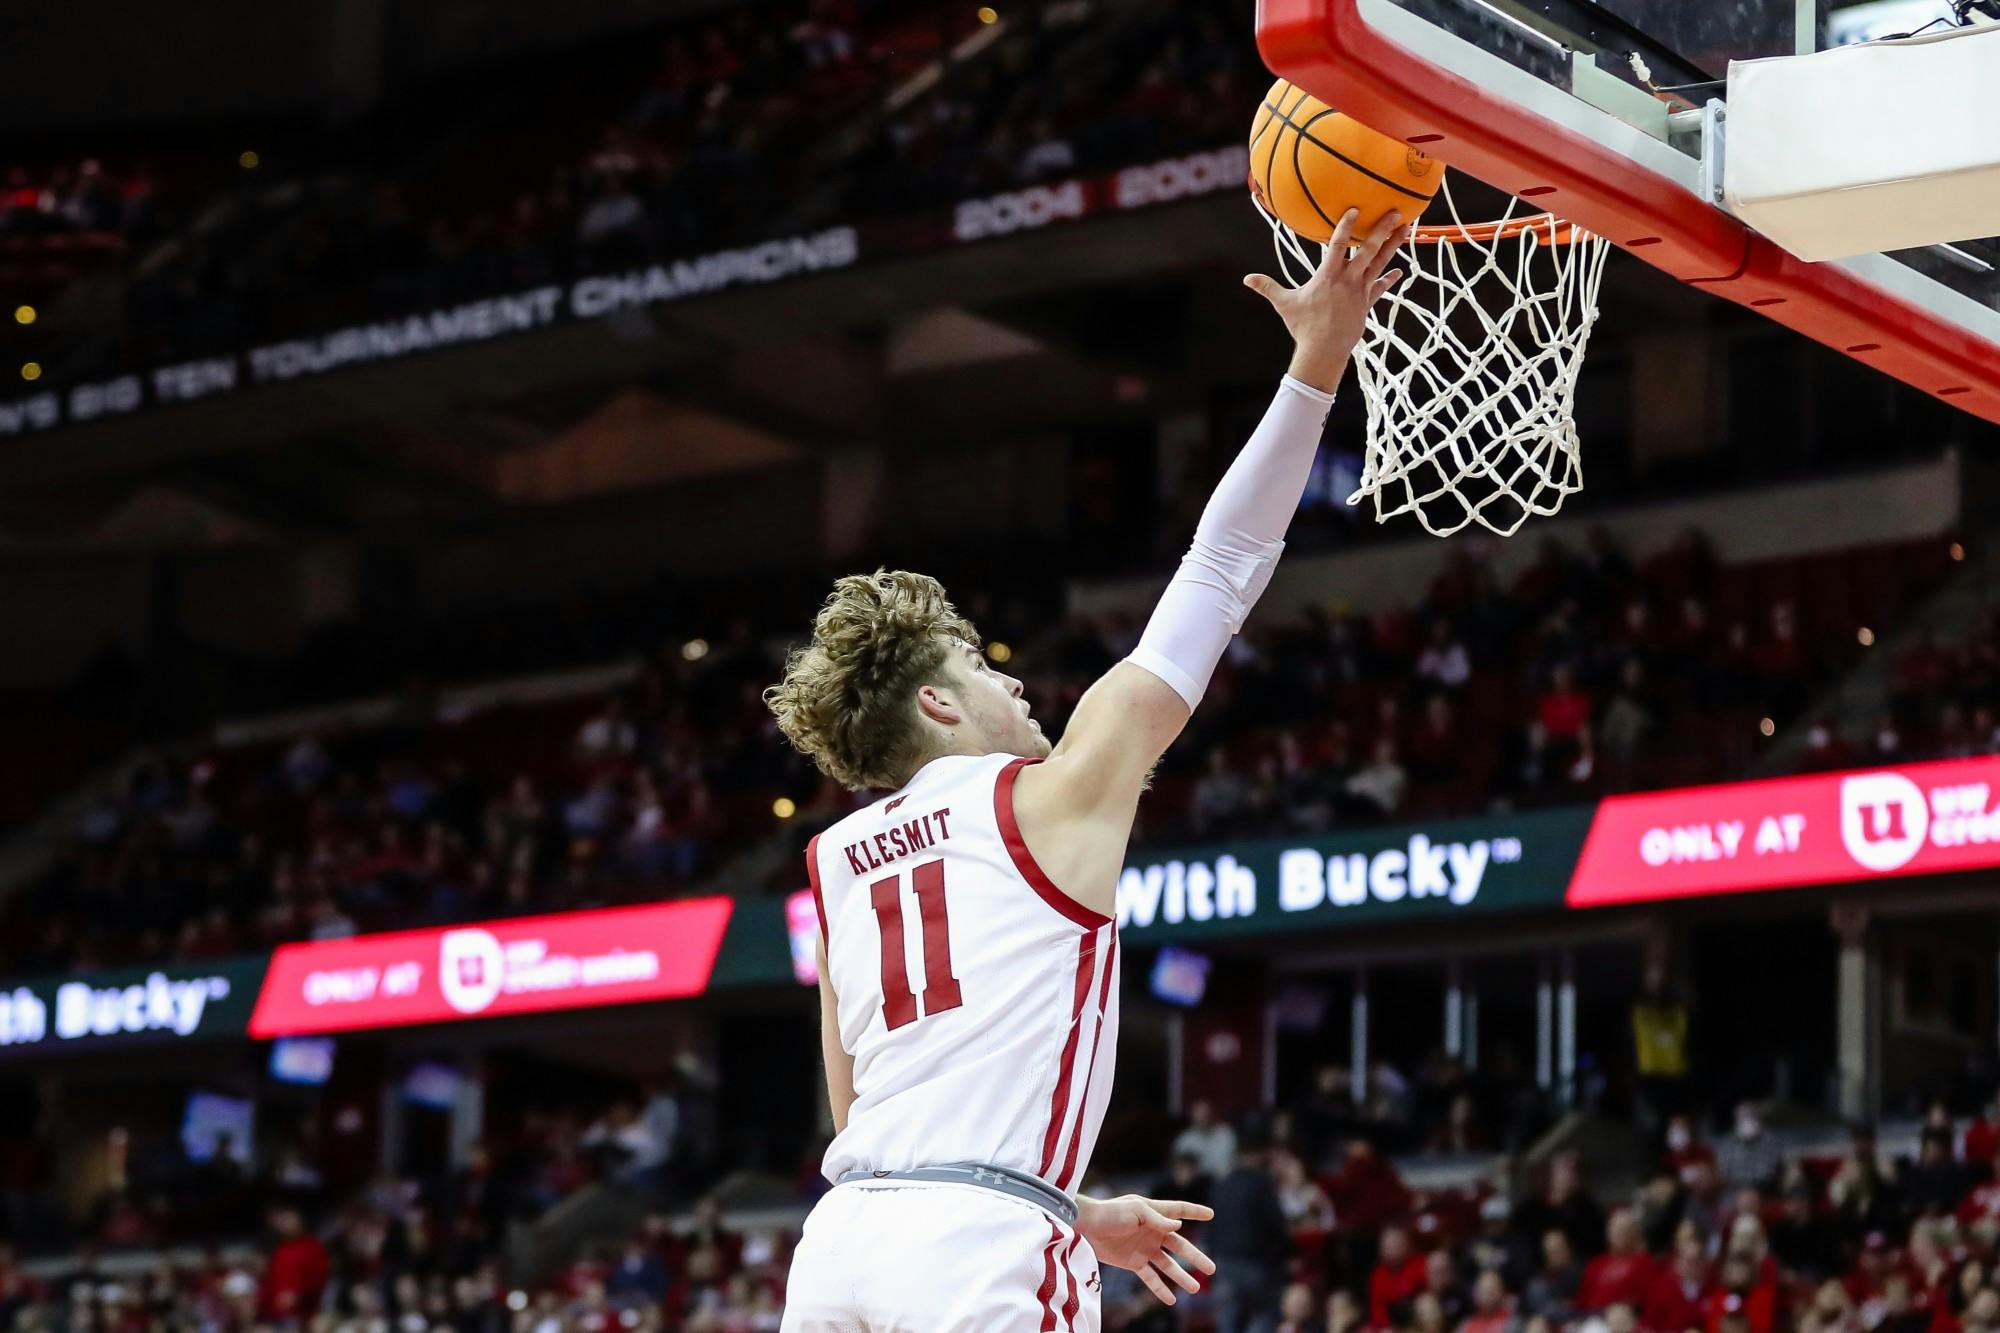 Wahl, starters shaky in return to the Kohl Center